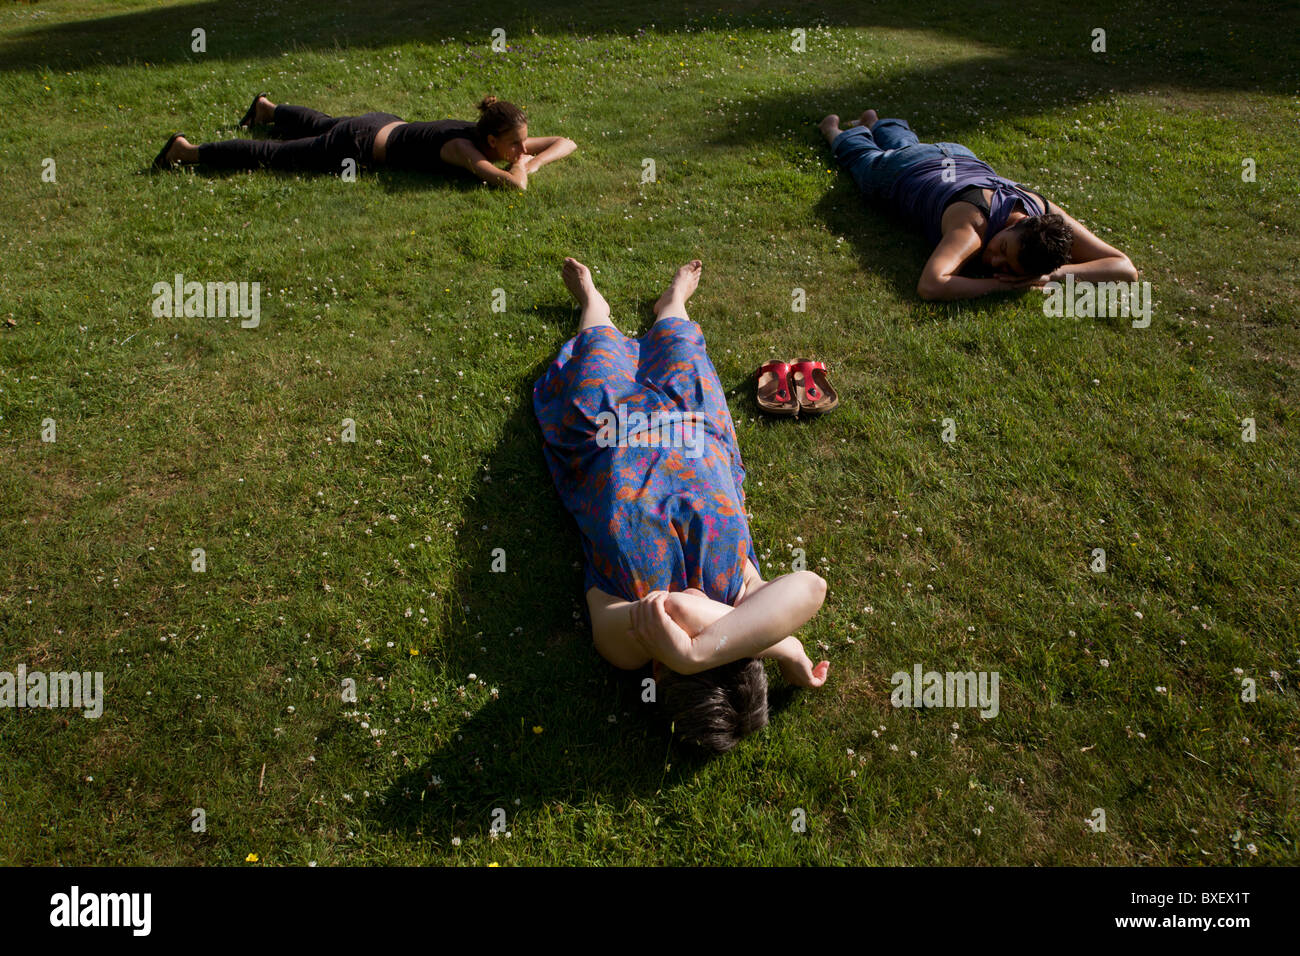 Volunteers doze on lawn after long working day at the Rivendell Buddhist Retreat Centre, East Sussex, England. Stock Photo